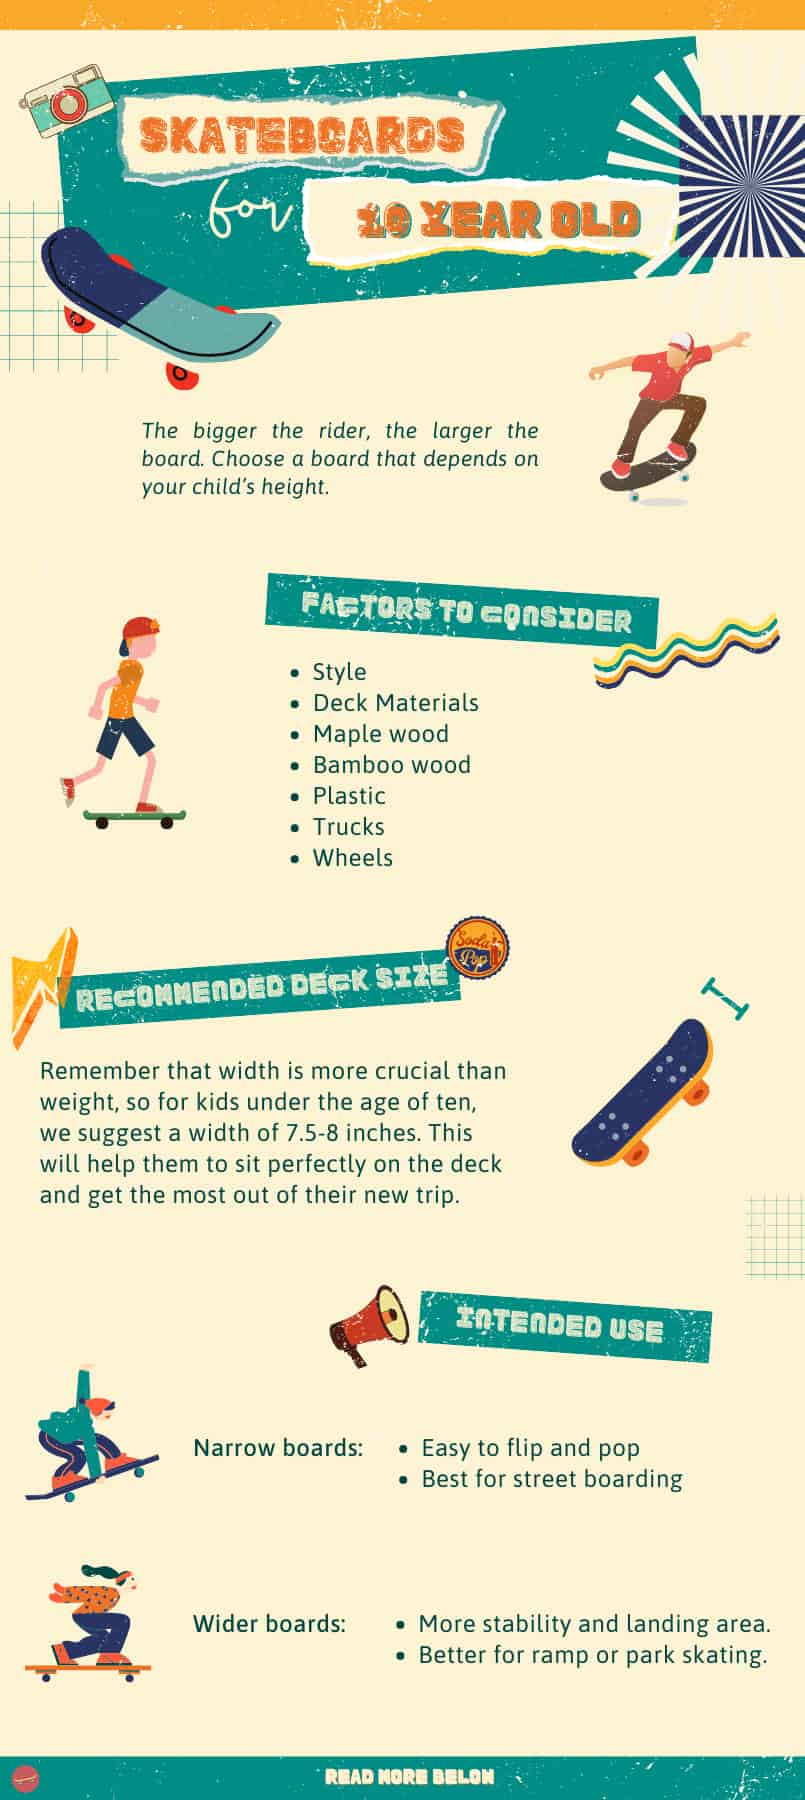 skateboard-size-for-10-year-old